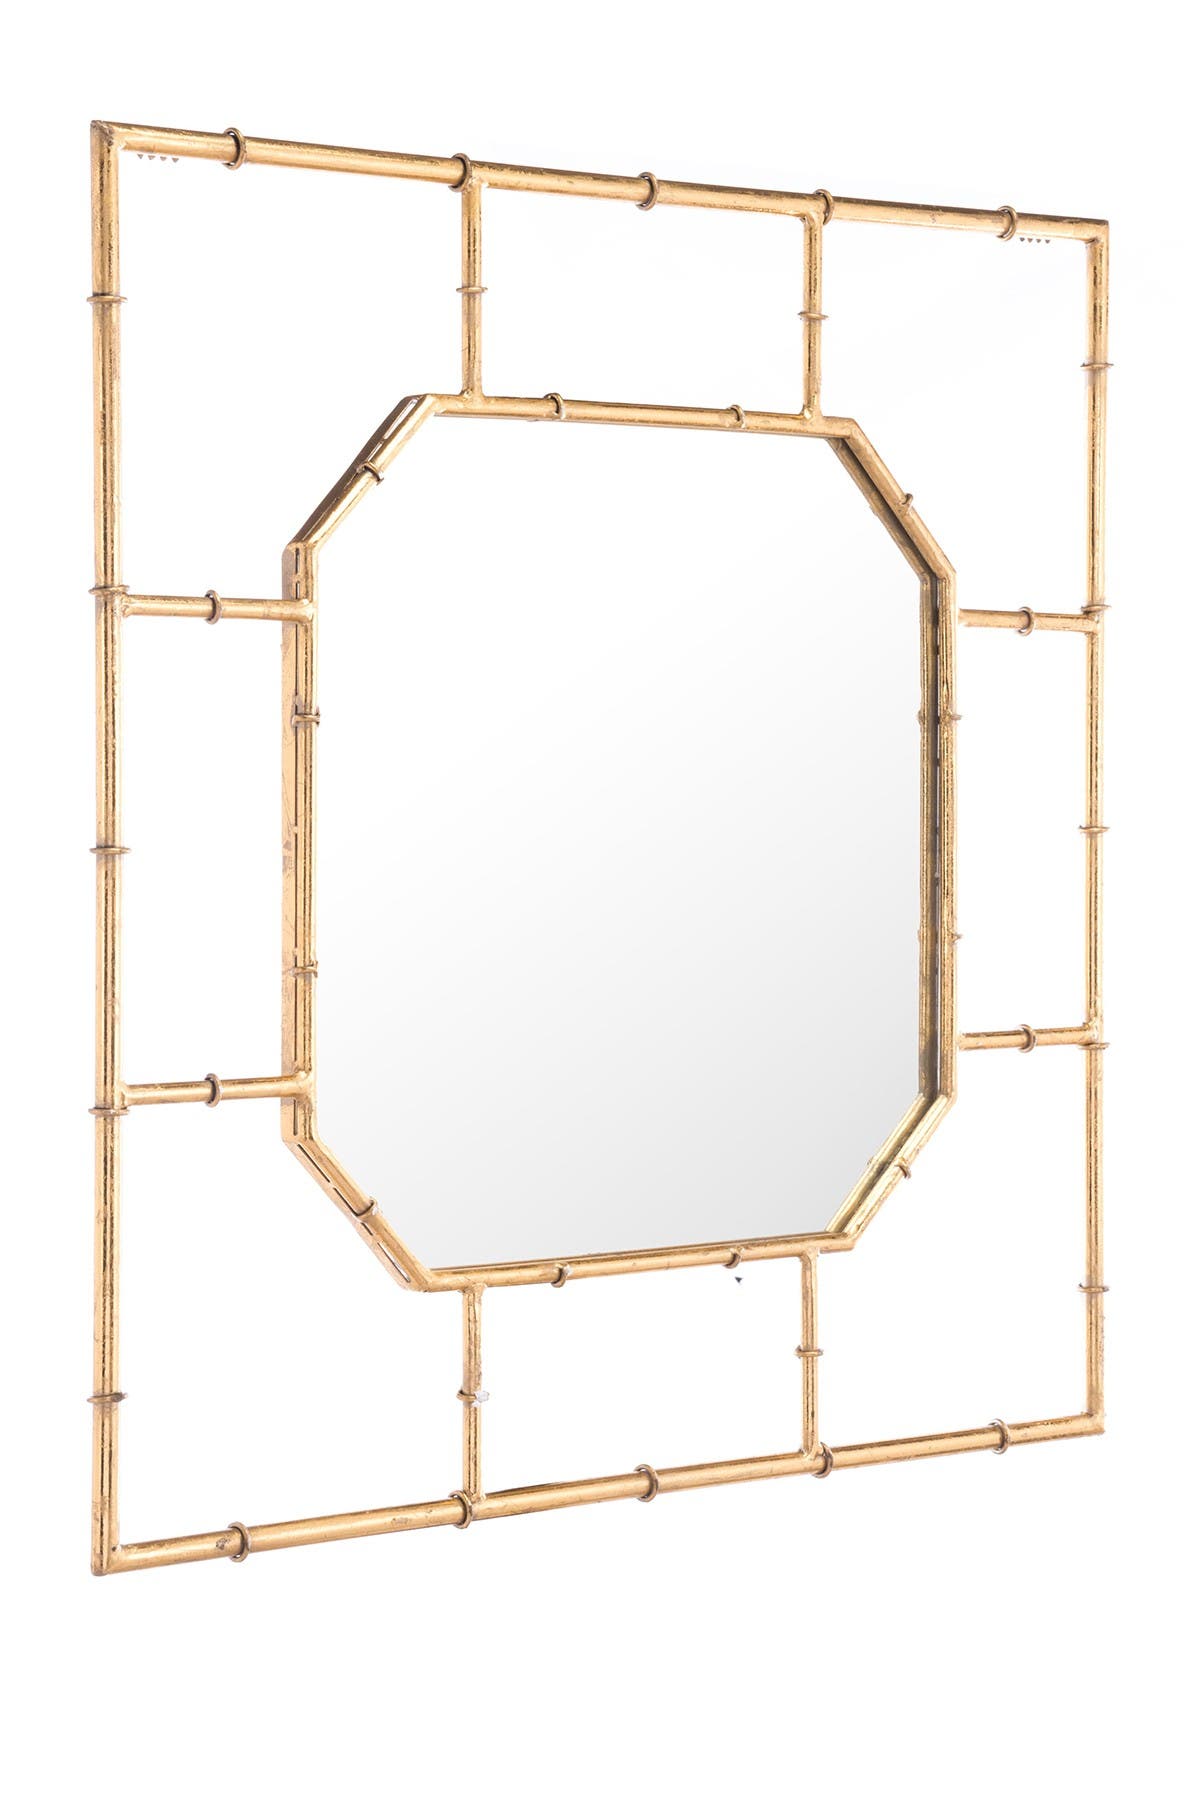 Zuo Modern Bamboo Square Gold Mirror